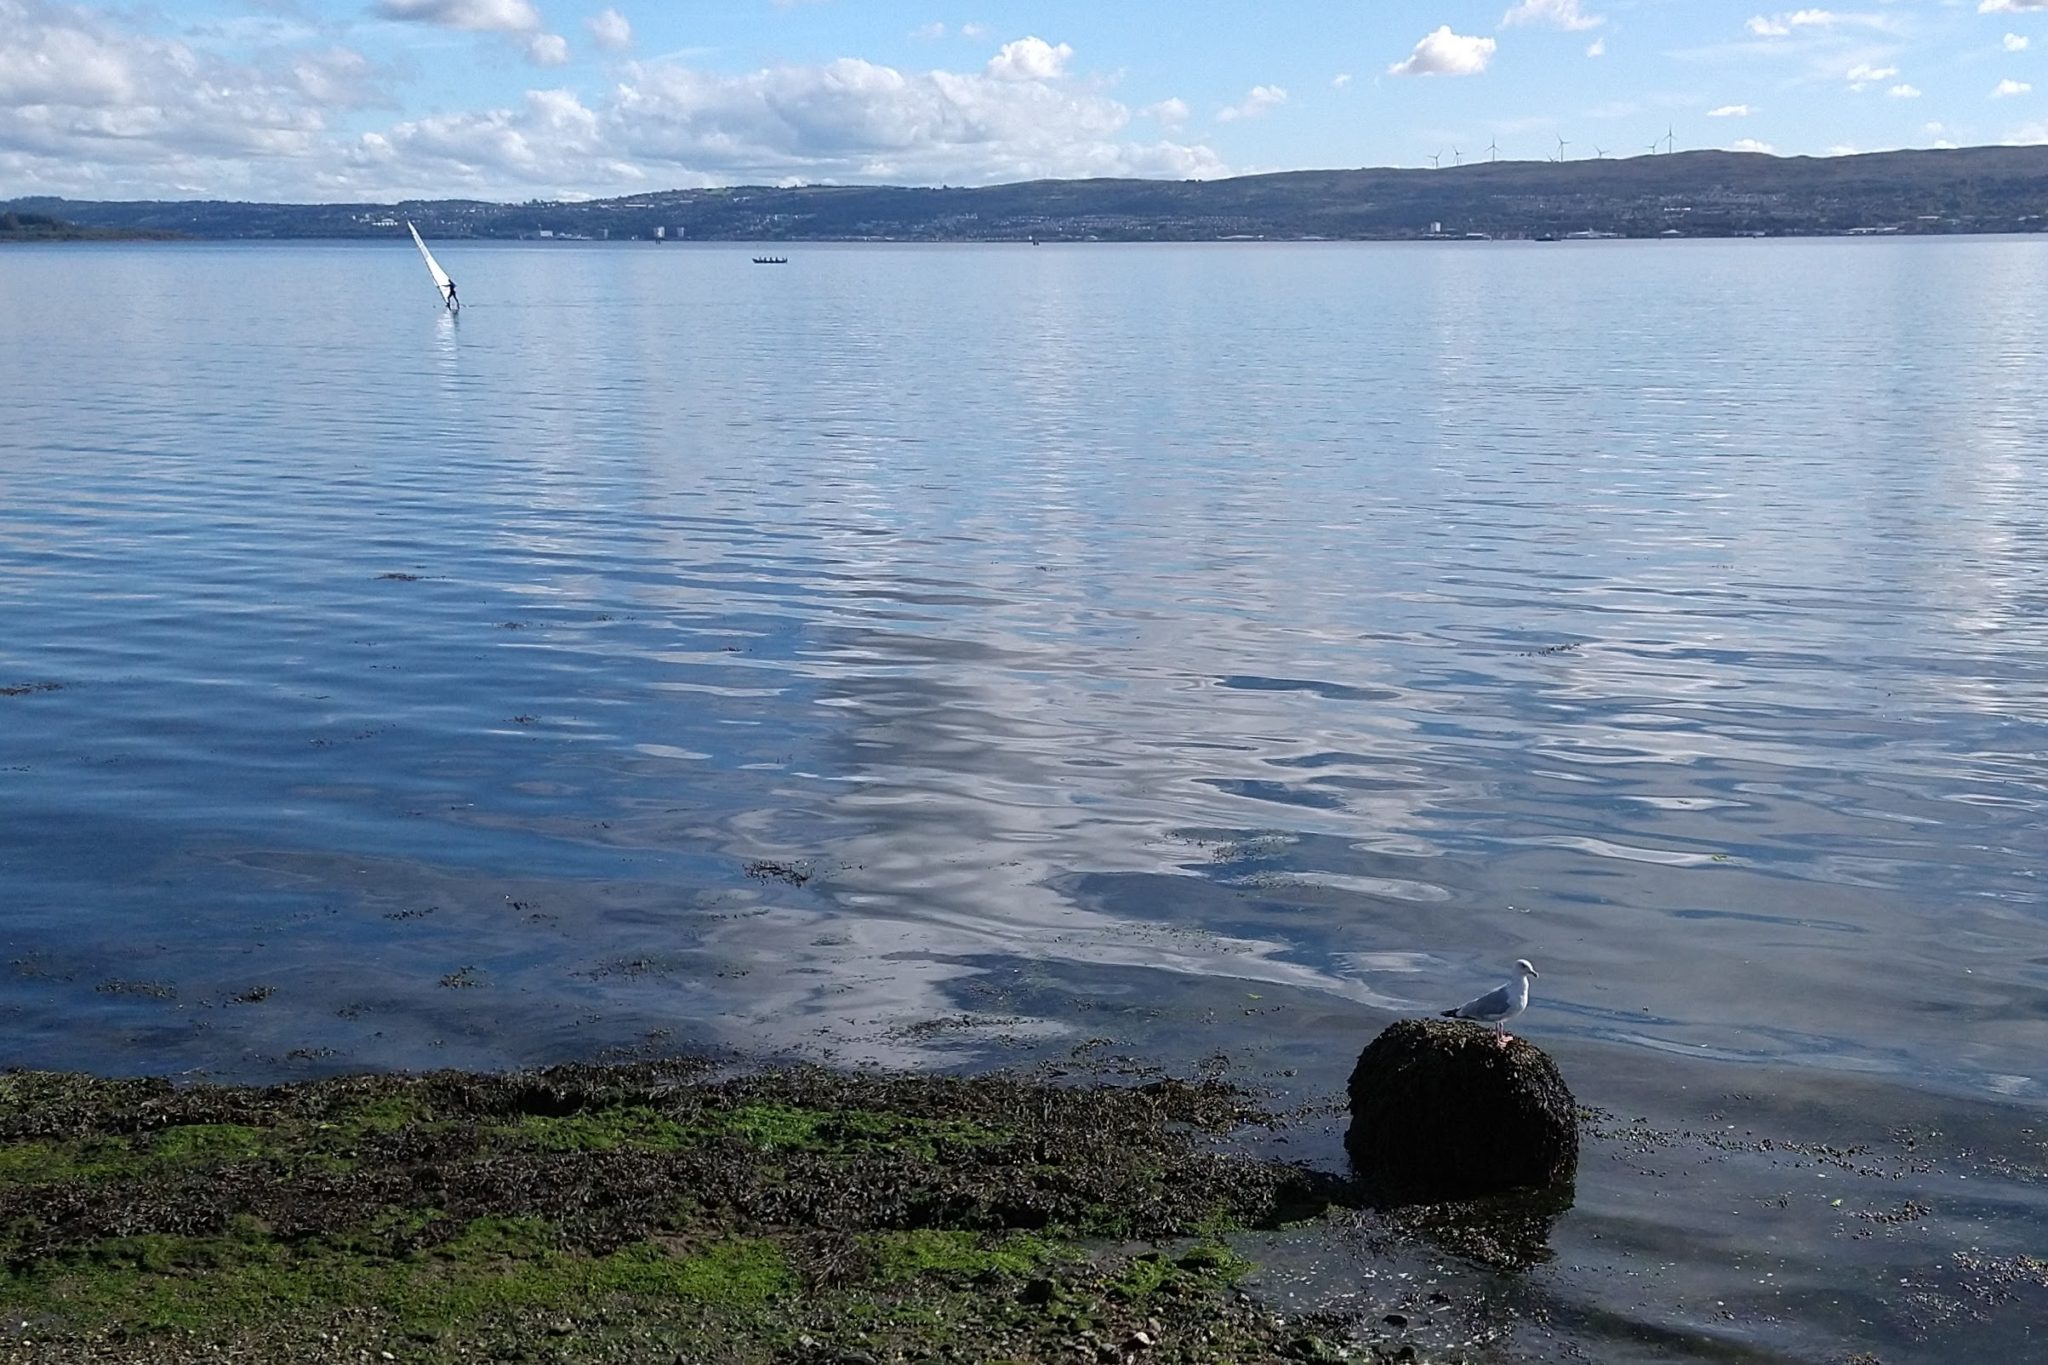 A seagull perched on a rock by the river Clyde in early September 2022